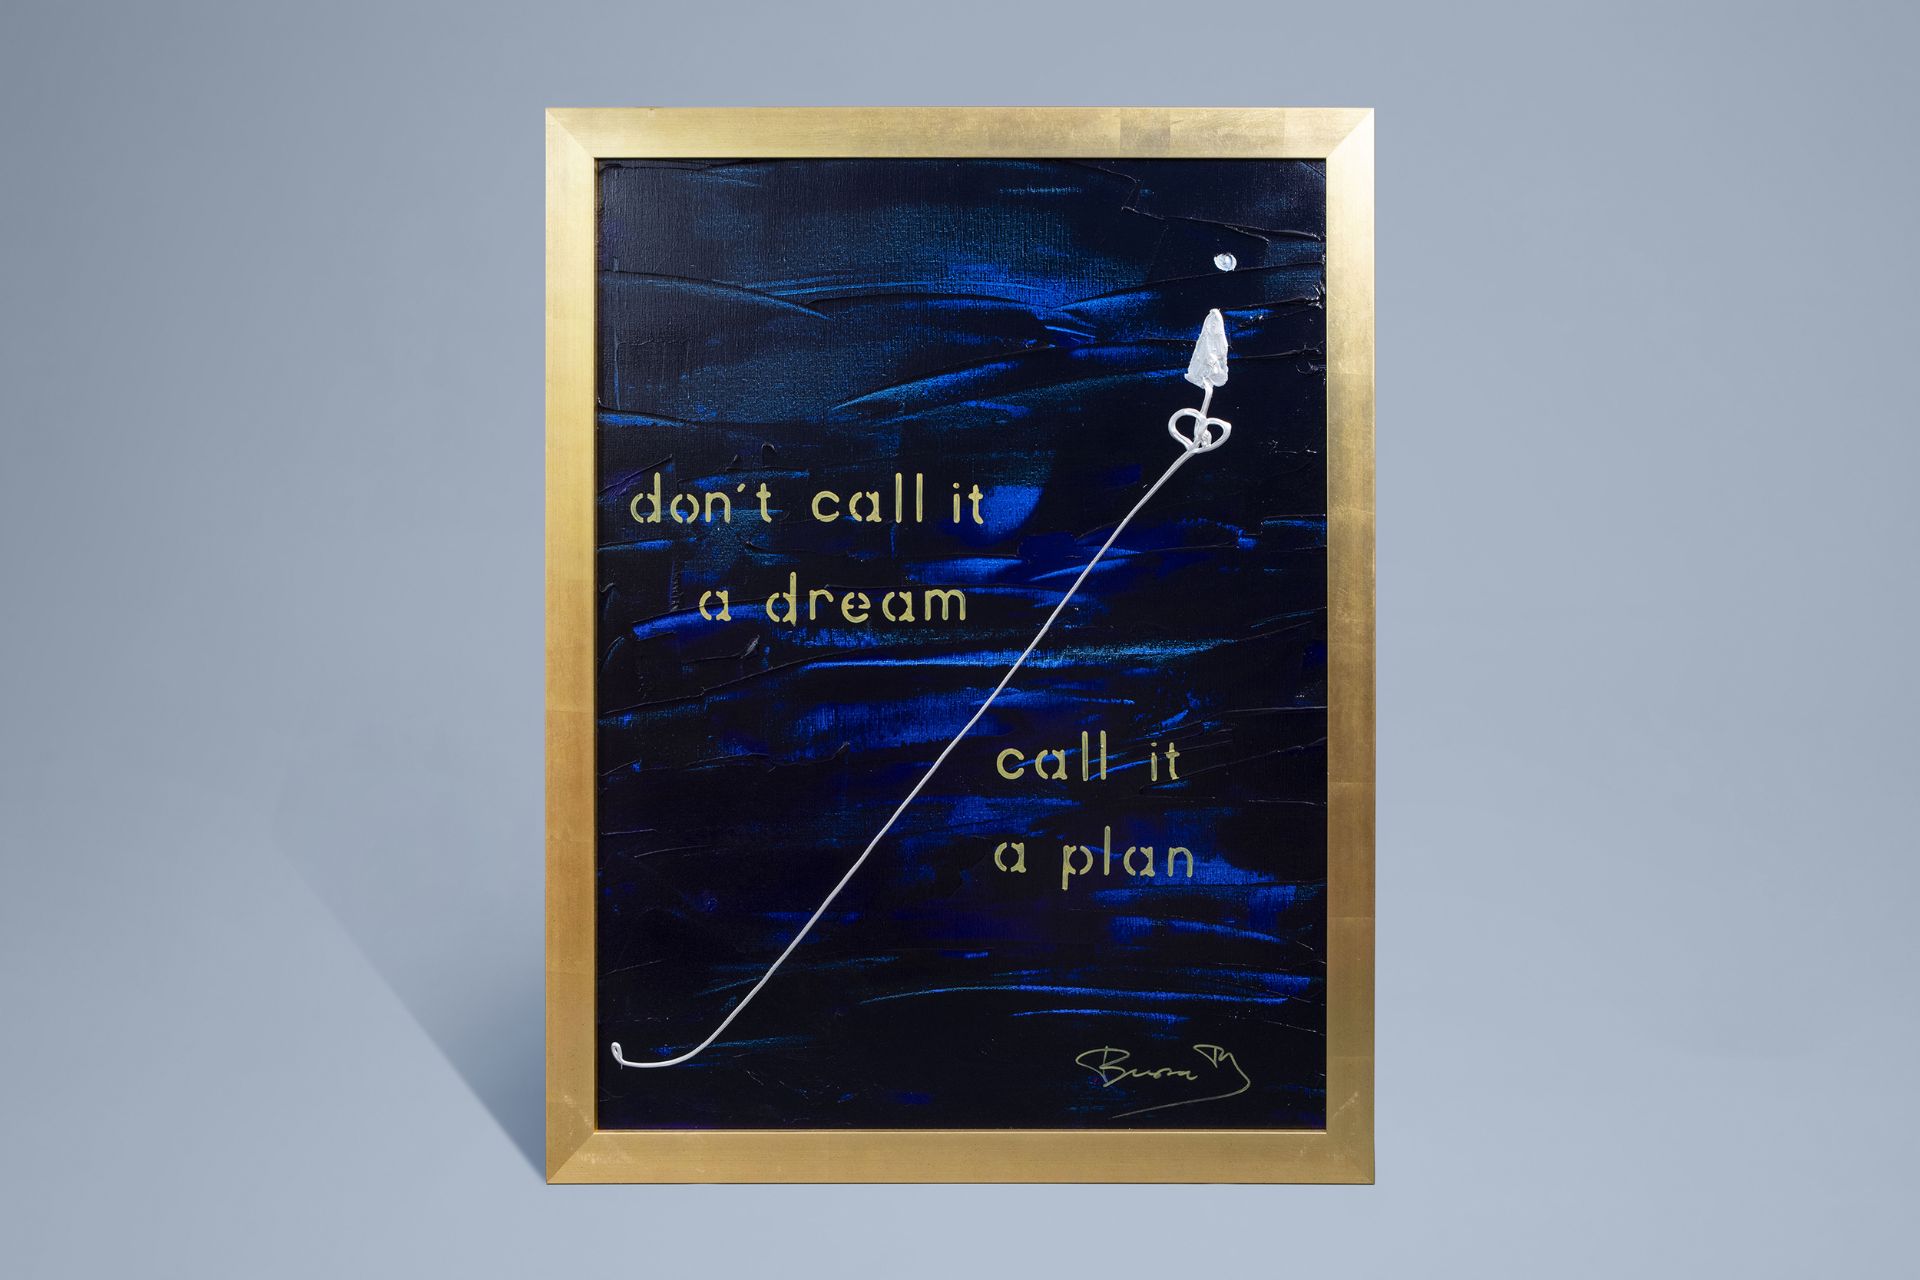 Philippe Bussa (1954): 'Don't call it a dream, call it a plan', oil on canvas - Image 2 of 6